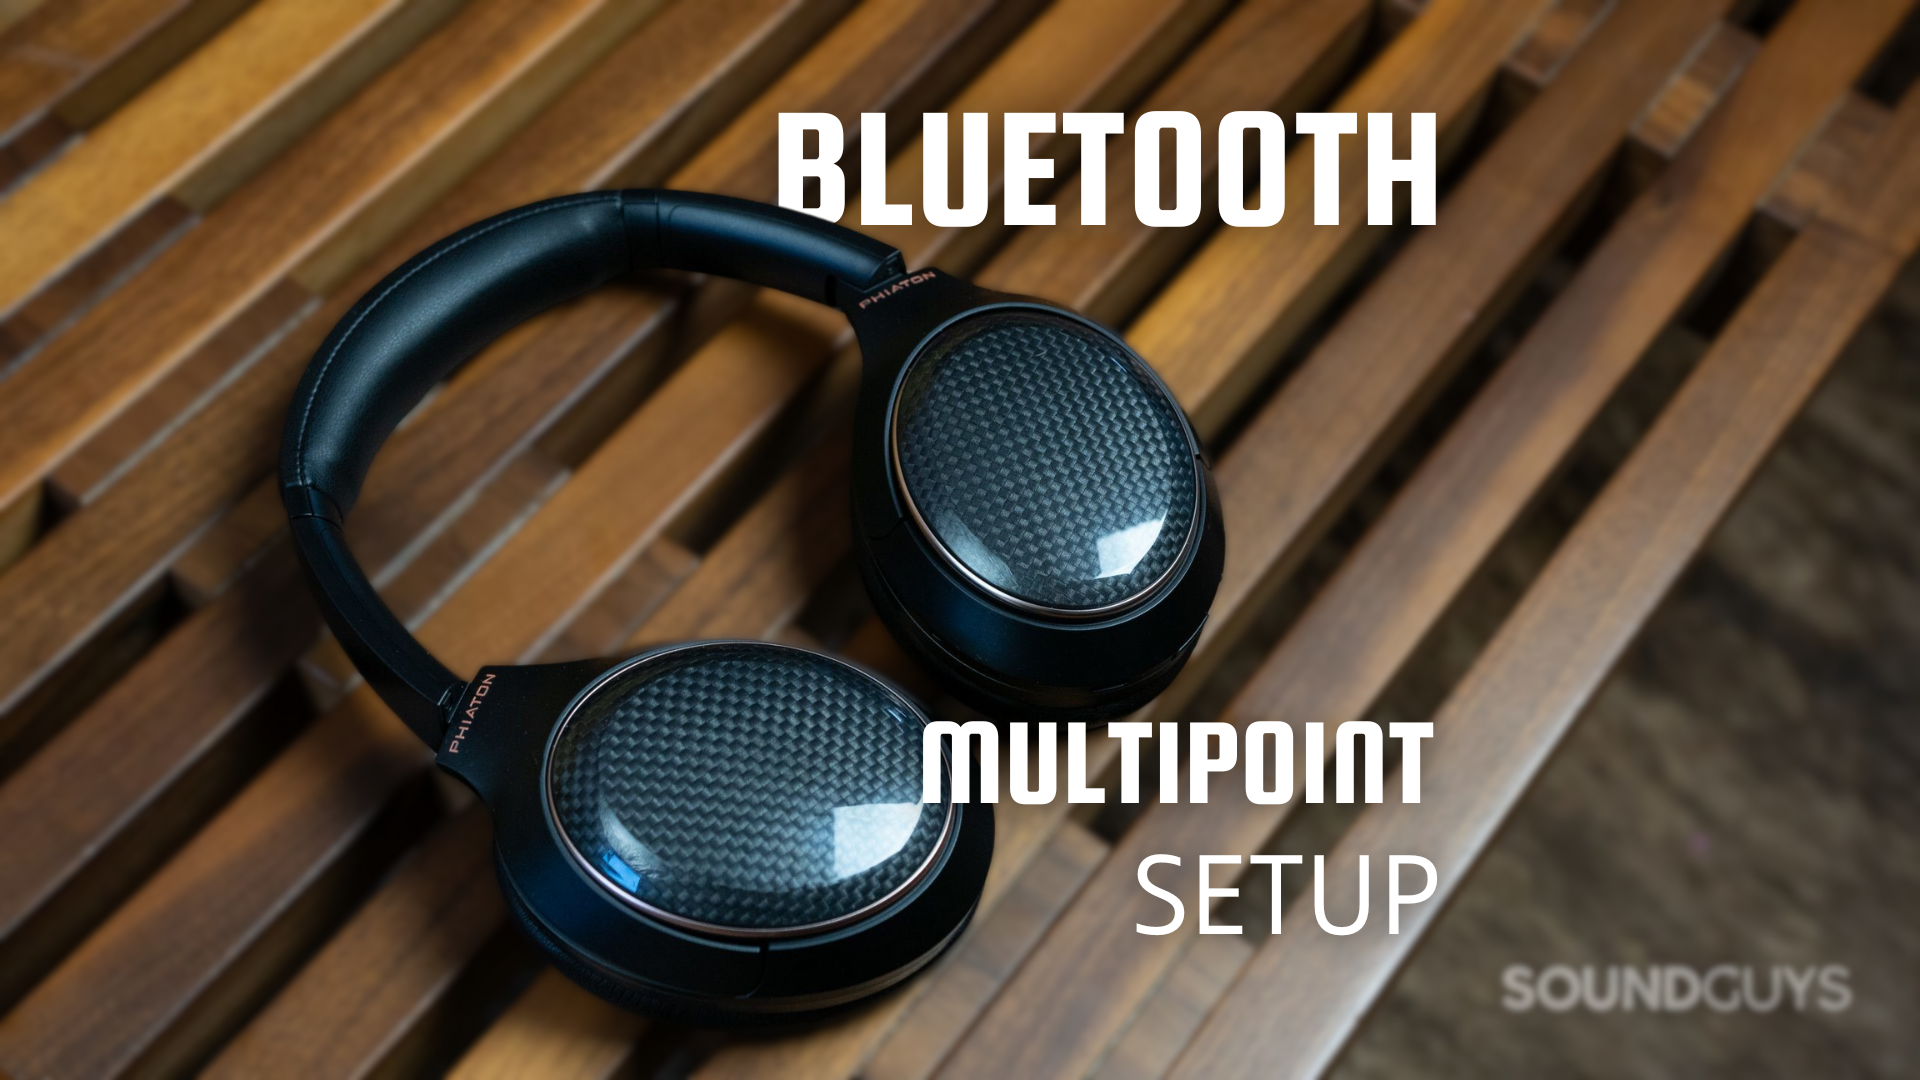 How to set up Bluetooth multipoint on your headphones